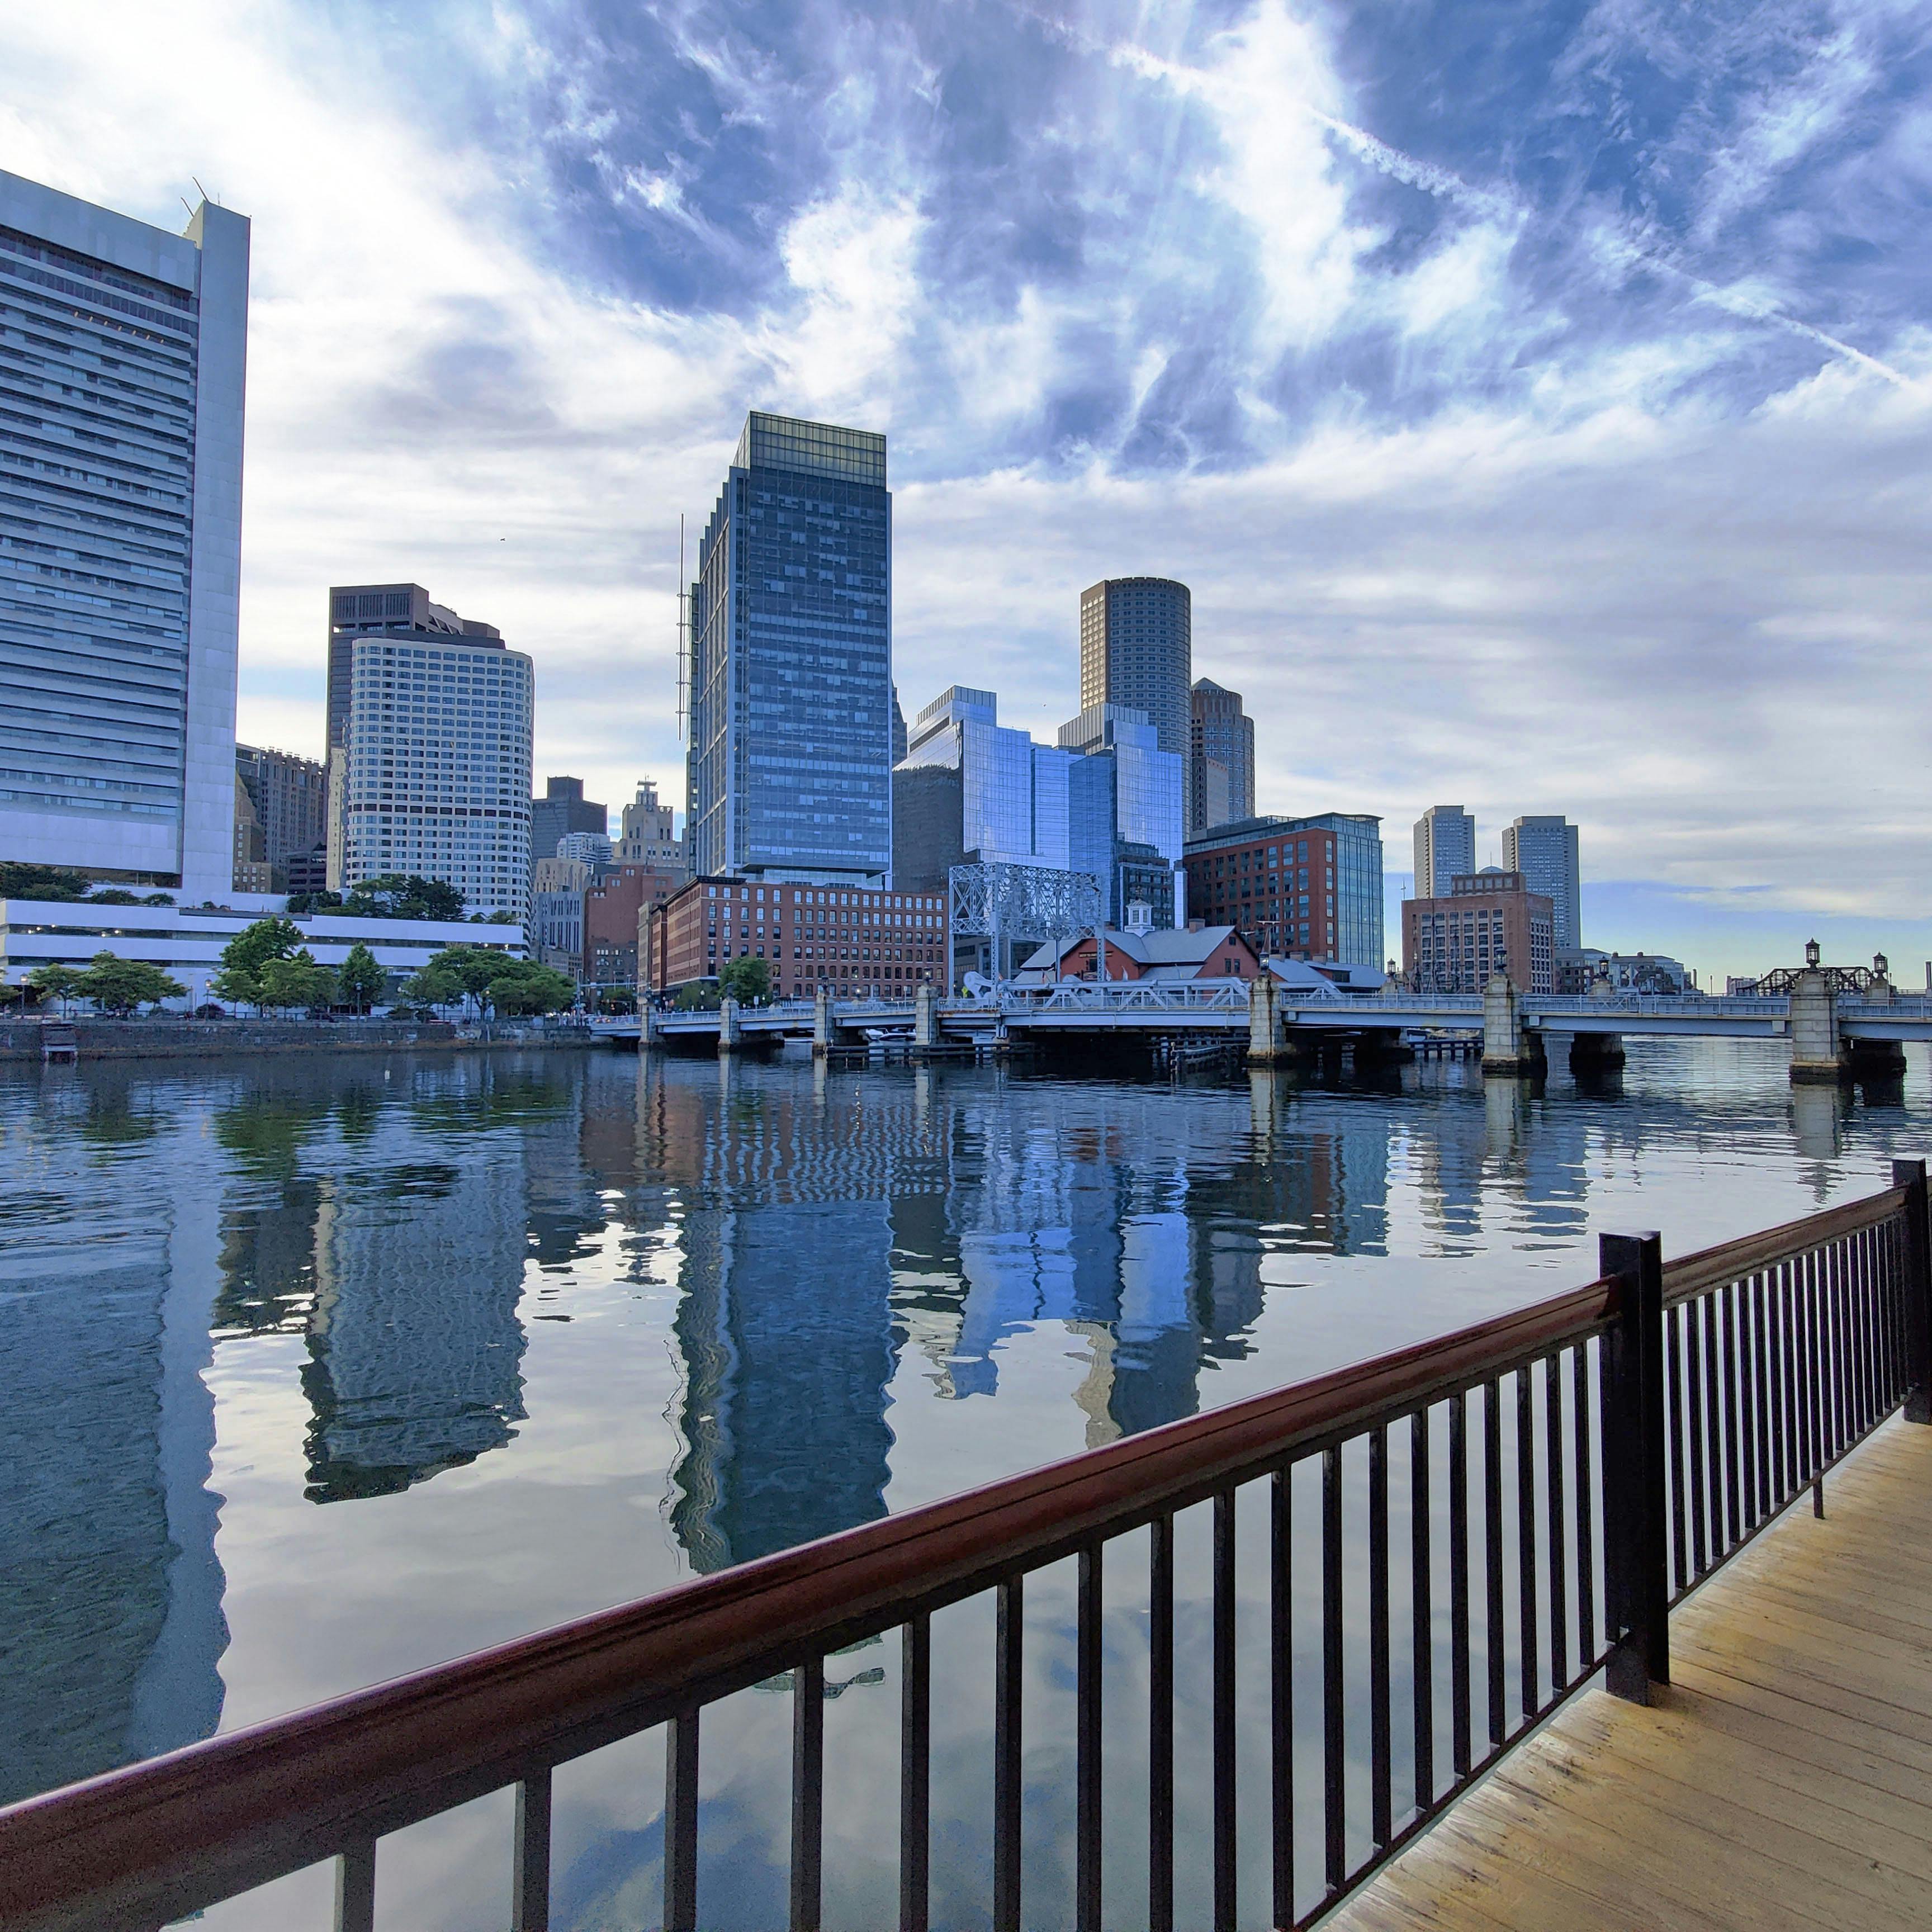 the boston business district skyline, viewed from the harborwalk in seaport